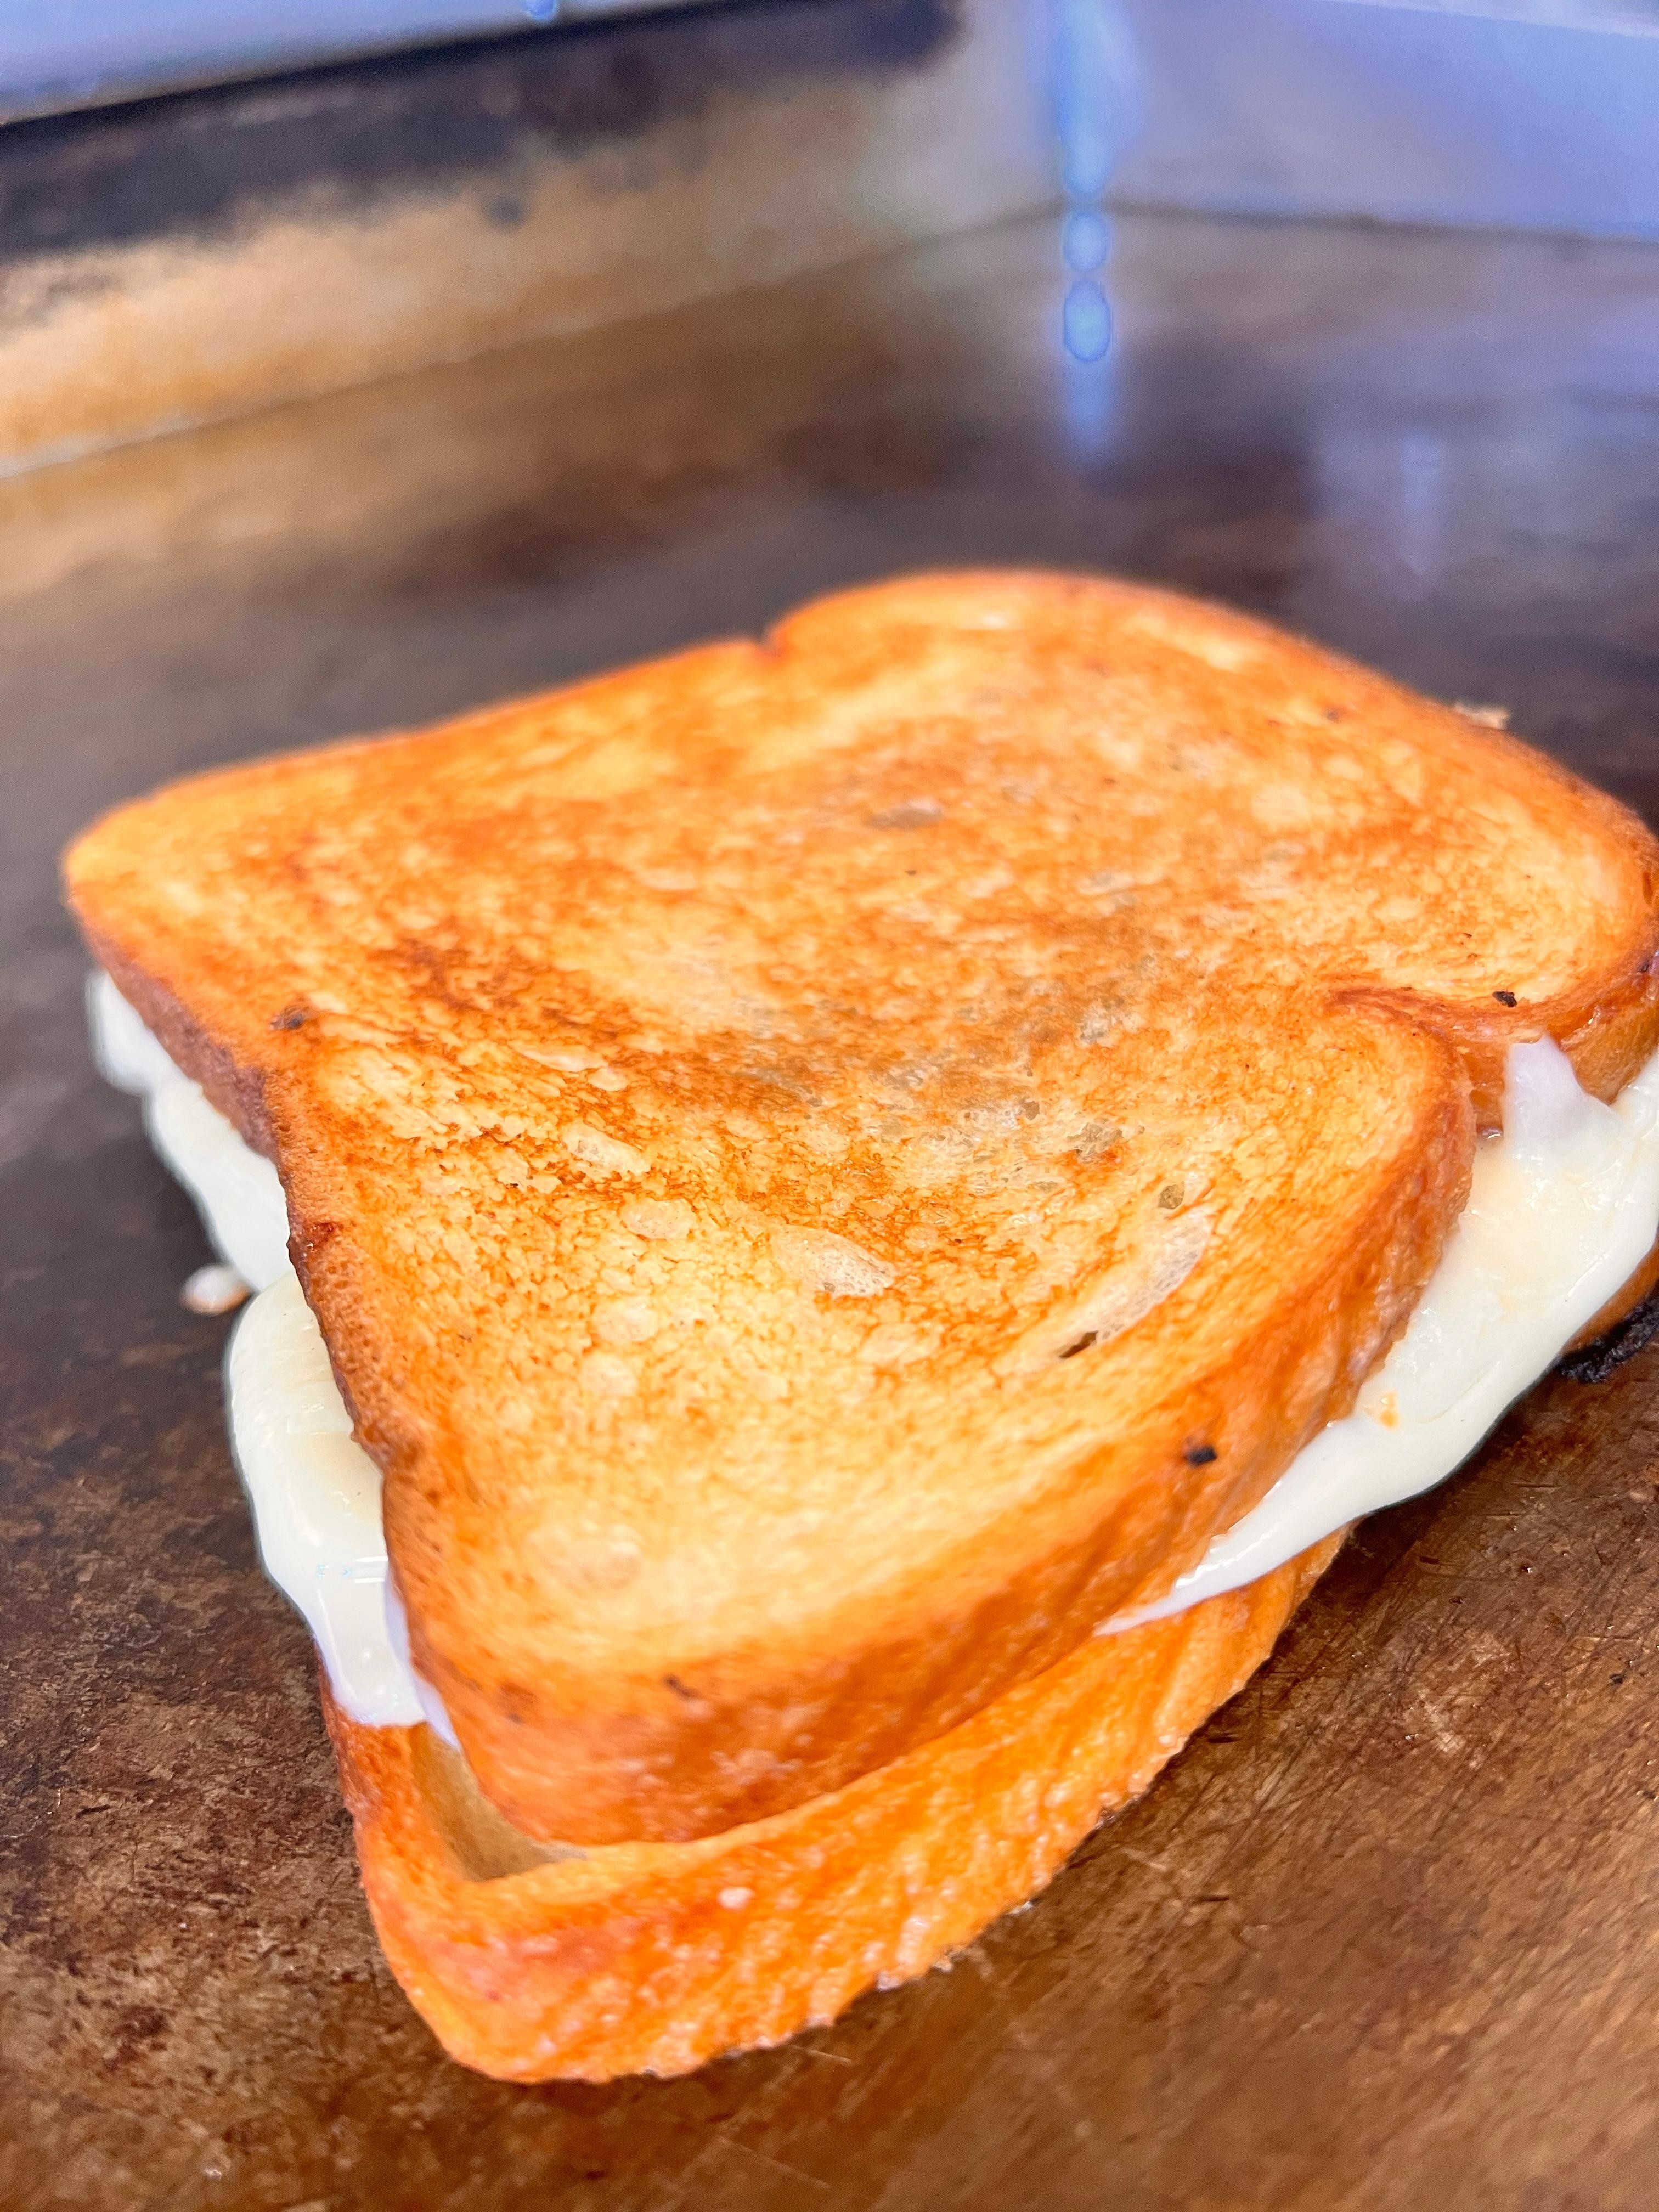 After School Grilled Cheese